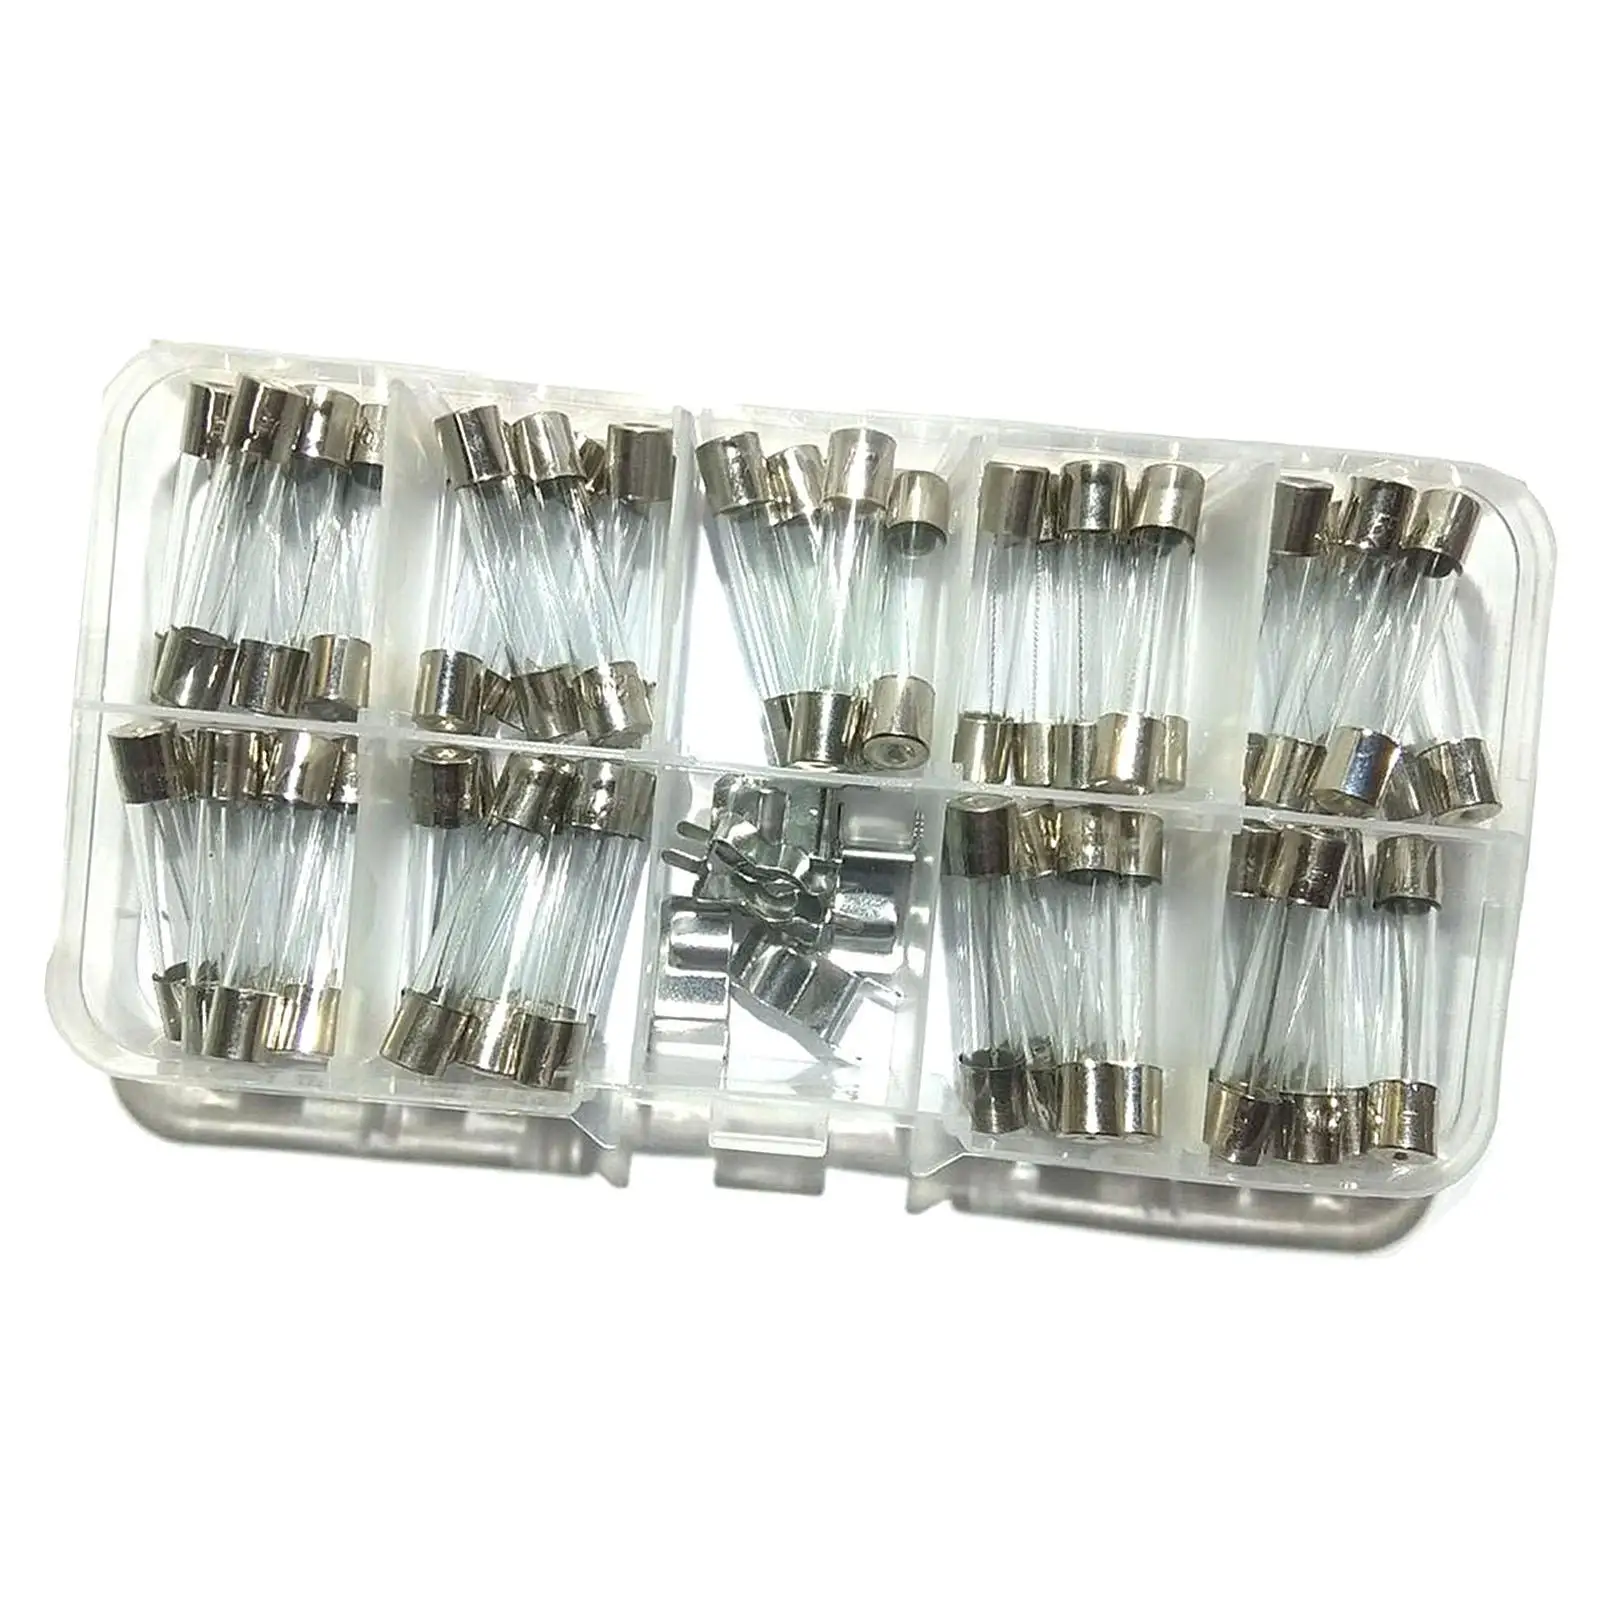 60Pcs Professional Glass Tube Fuses 20A 1A 5A 30A 3A 0.5A Replaces Accessories for Communication Equipment Electronic Industry